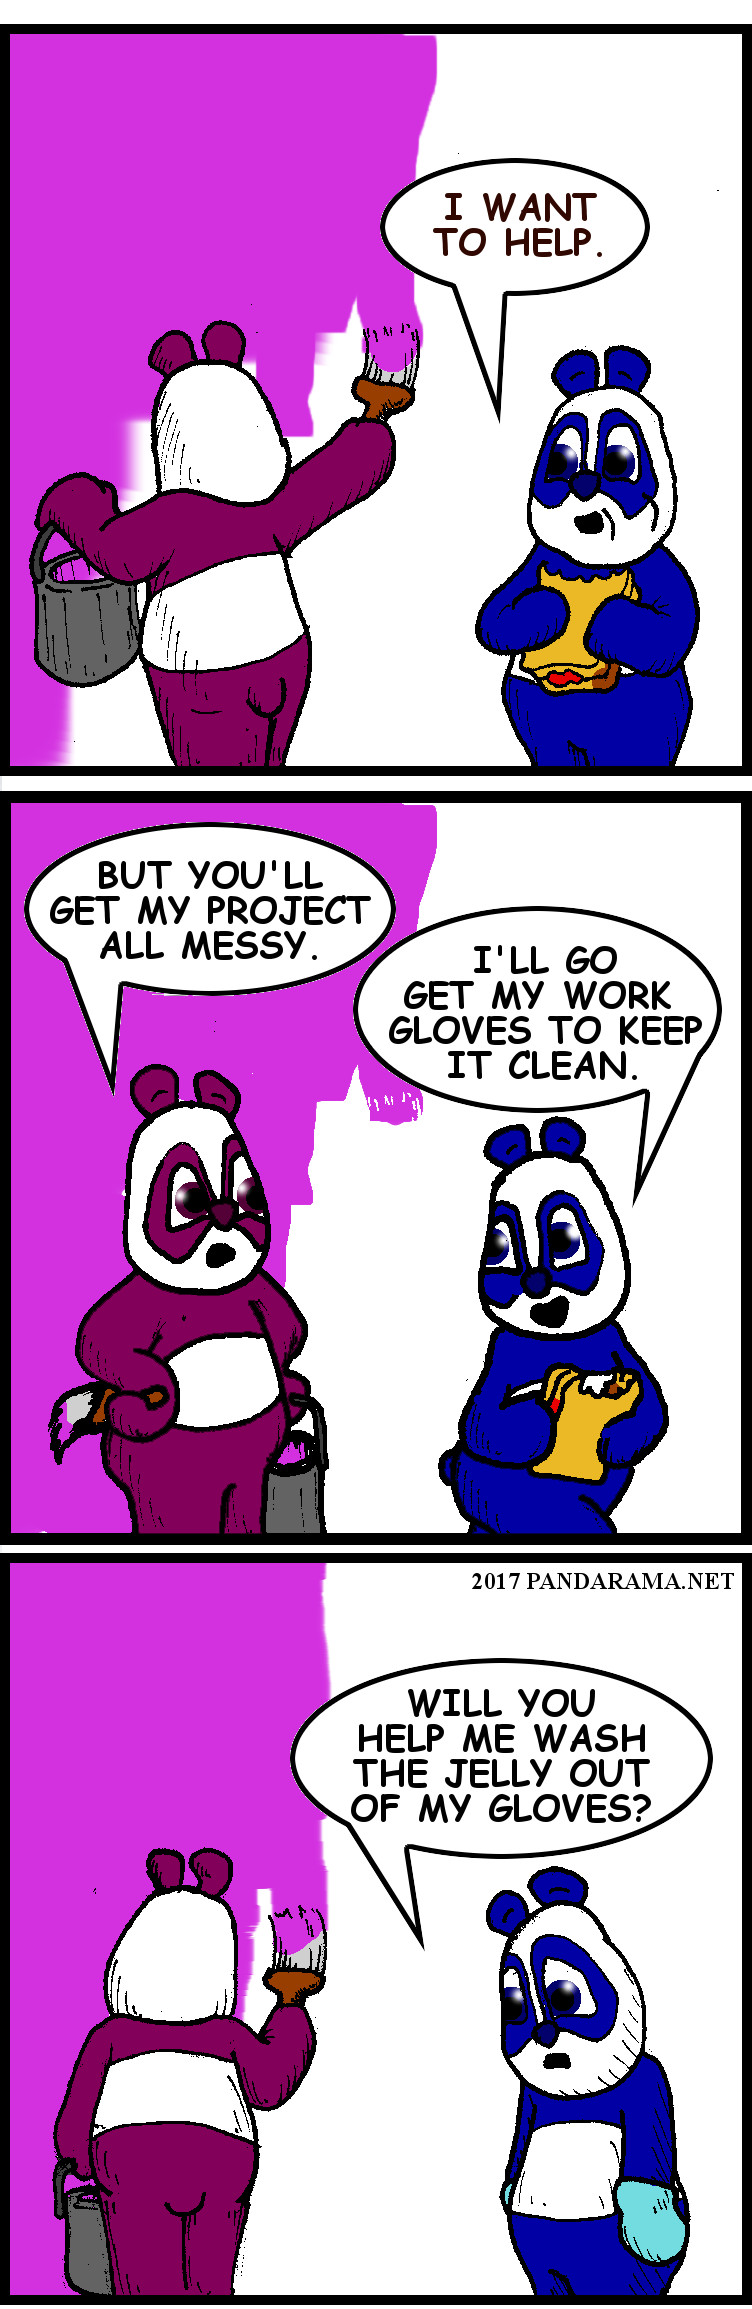 panda is painting, the other panda wants to help but is eating a peanutbutter and jelly sandwich, so the panda puts on work gloves to keep the project clean, but instead needs help washing jelly out of gloves. panda comic. jelly cartoon. work gloves.